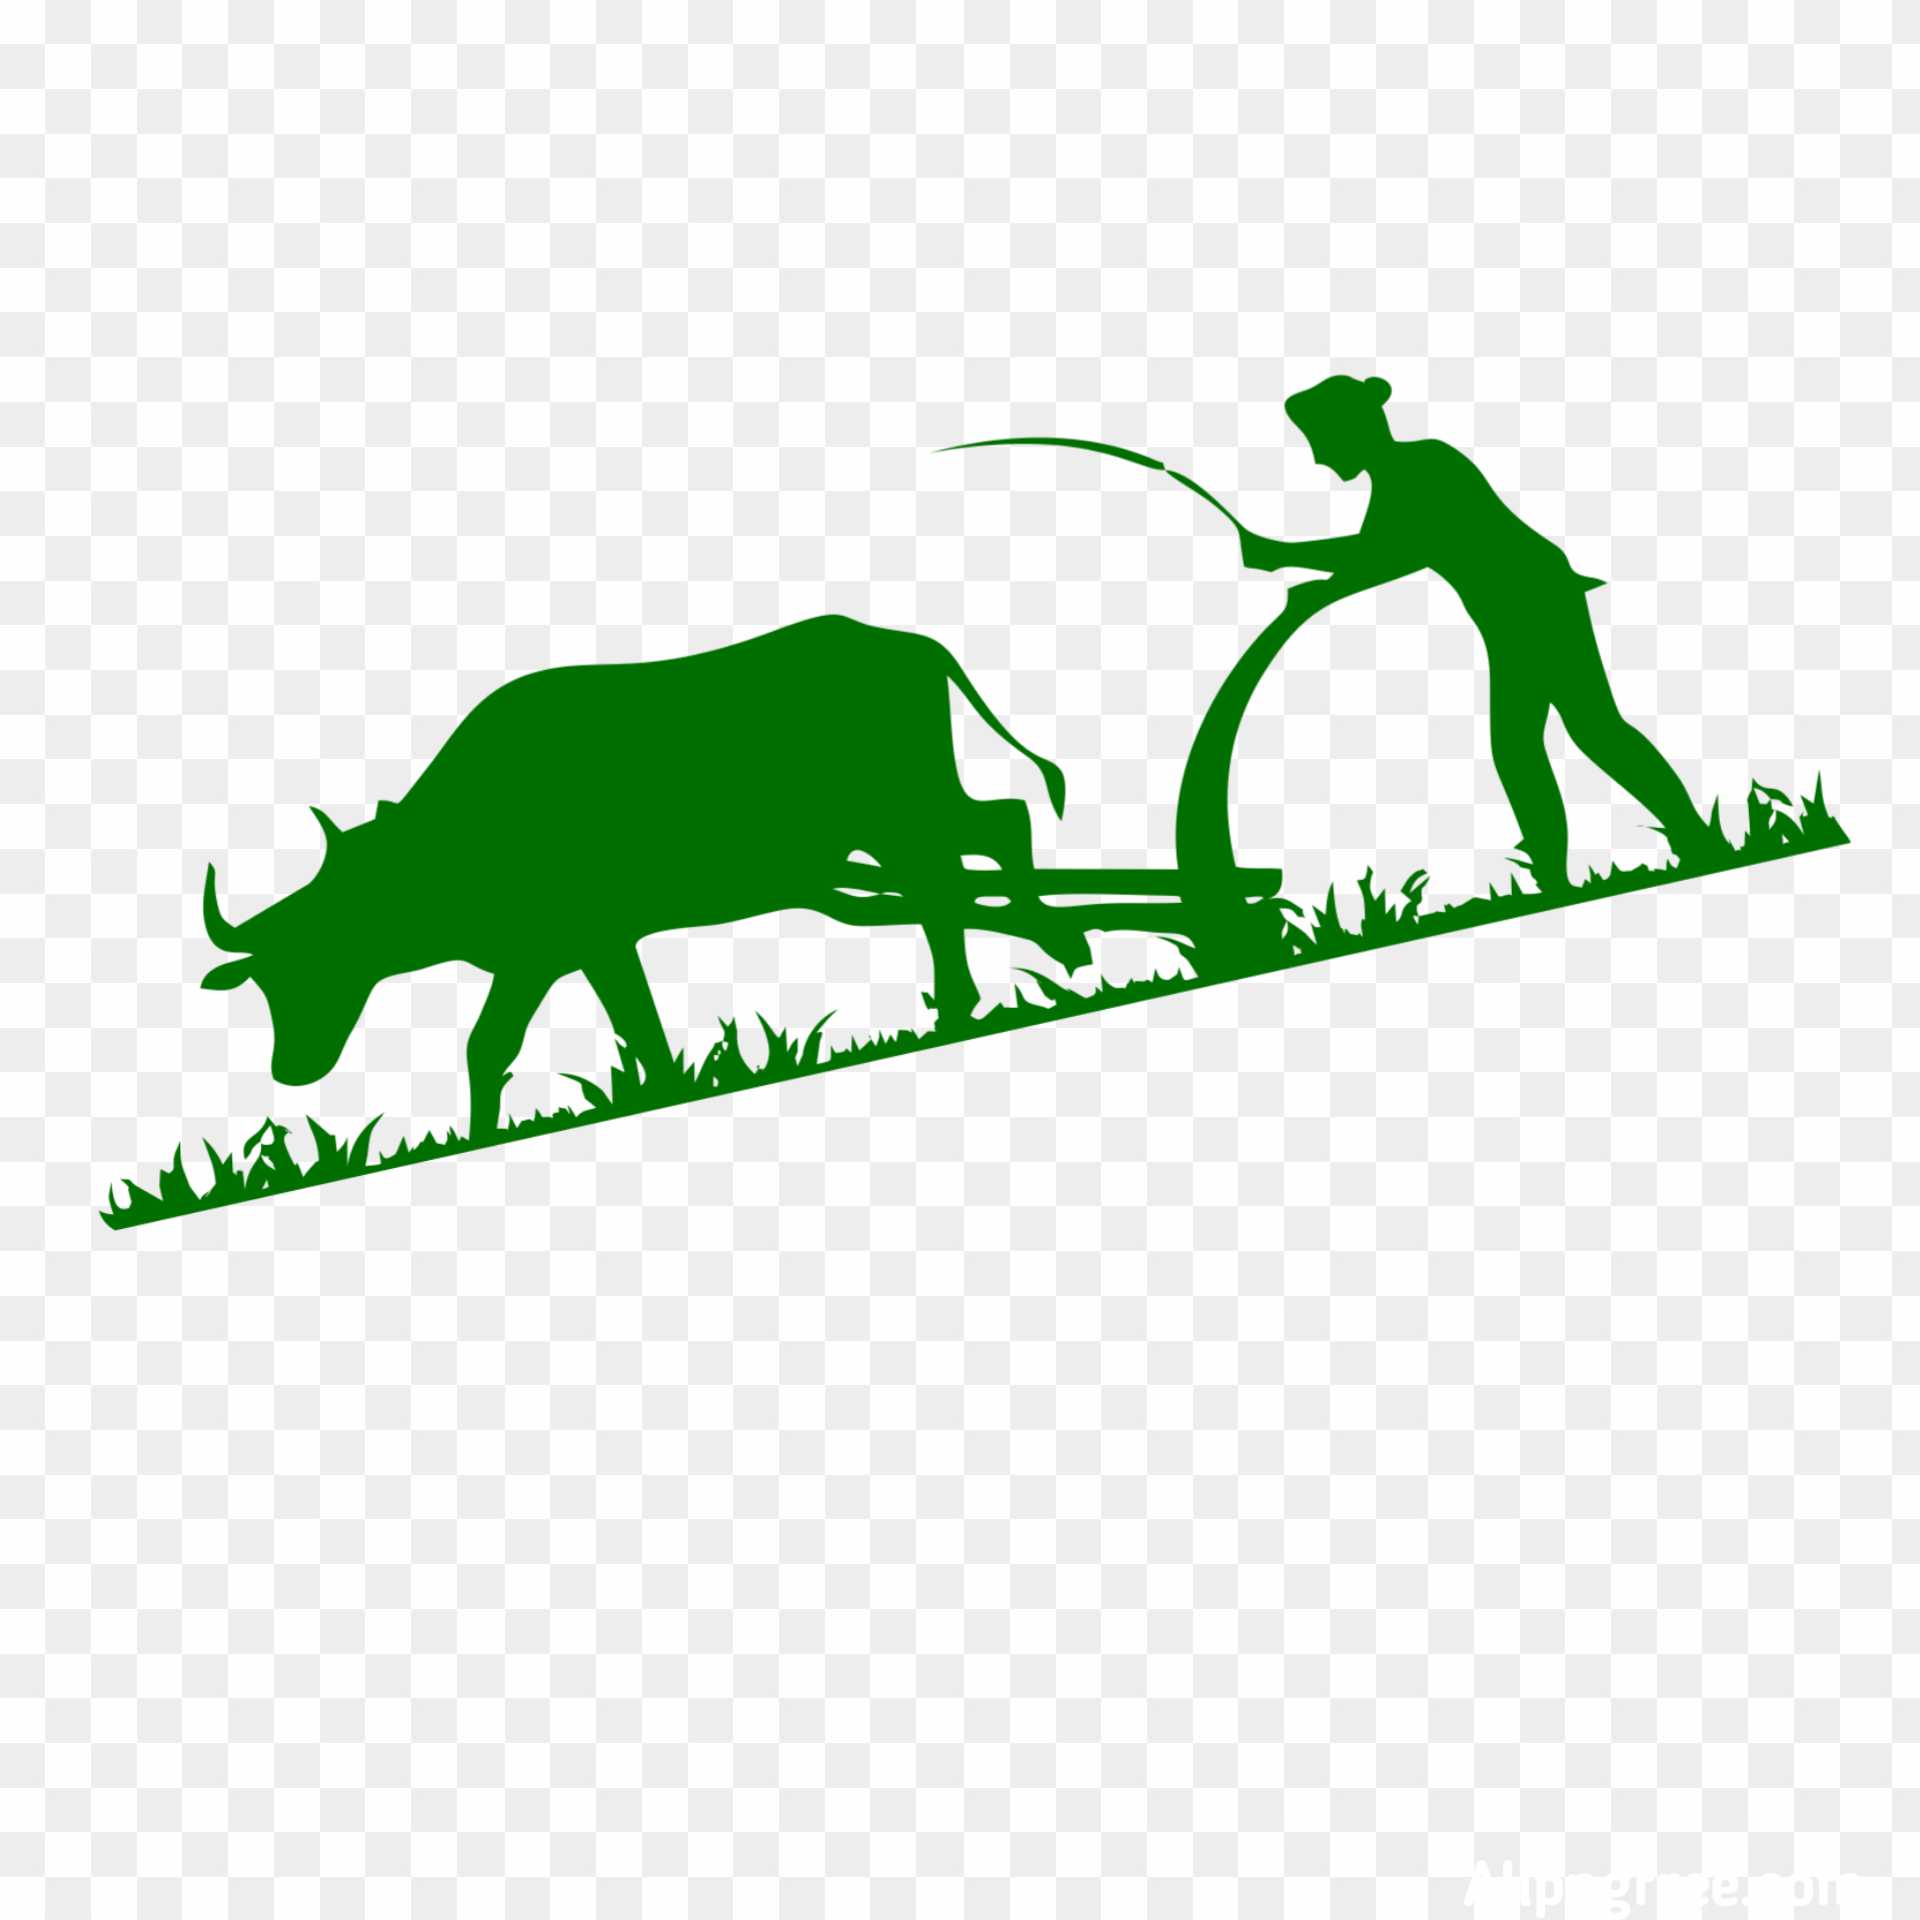 Happy Farmer day png clipart